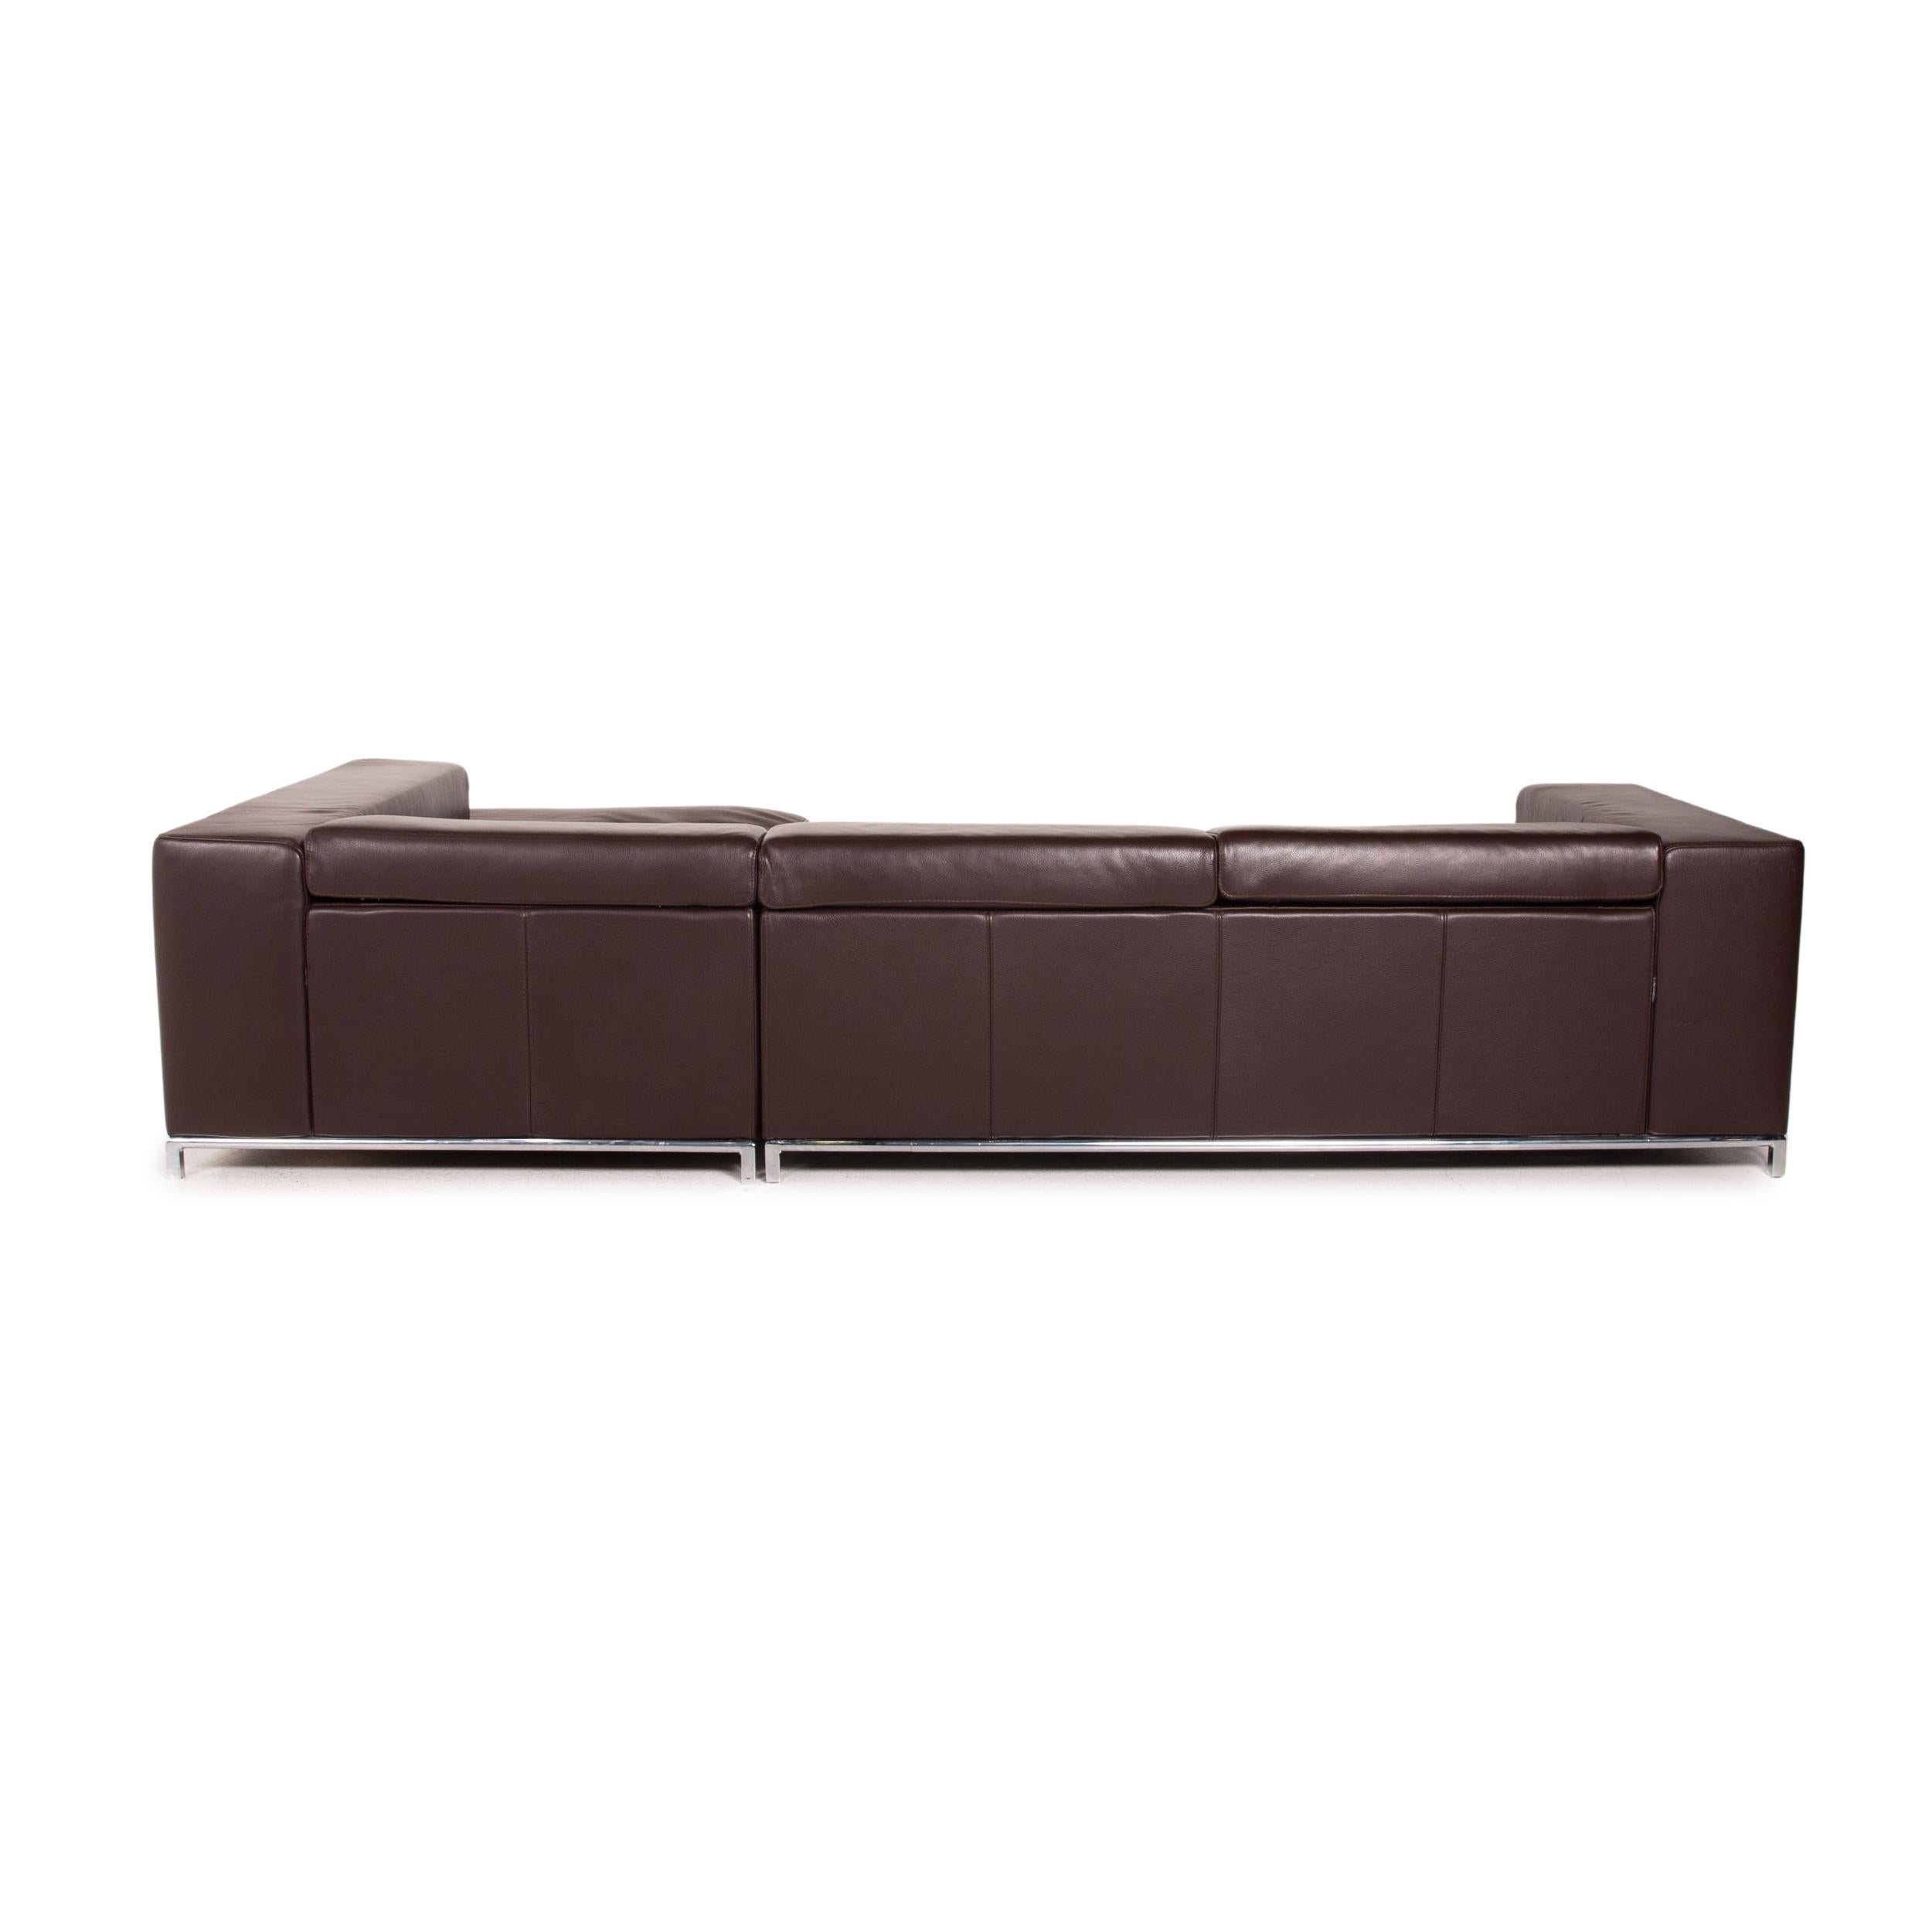 Who's Perfect Leather Corner Sofa Brown Dark Brown Sofa Couch 6